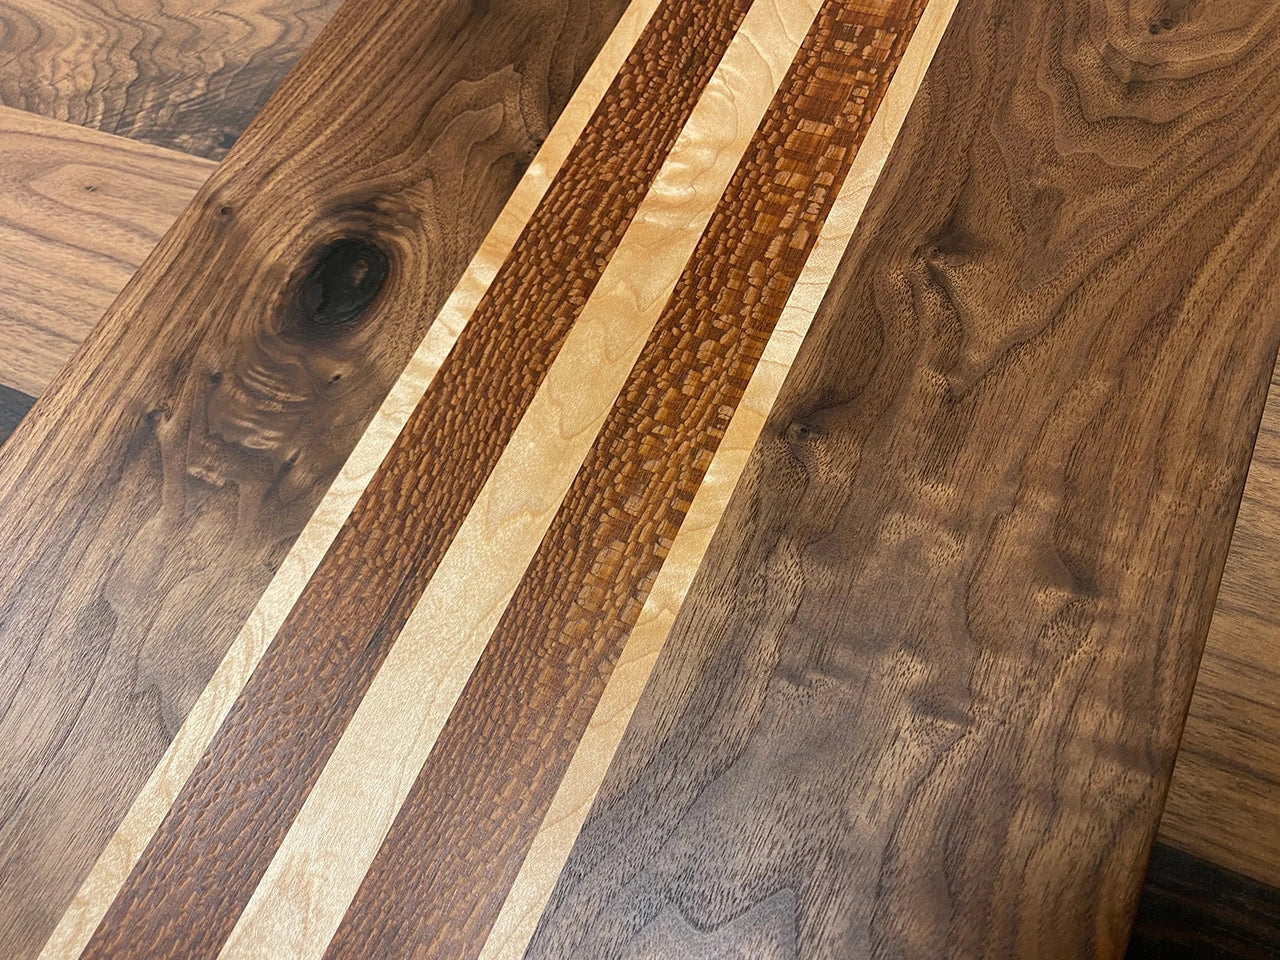 Lacewood Serving Board